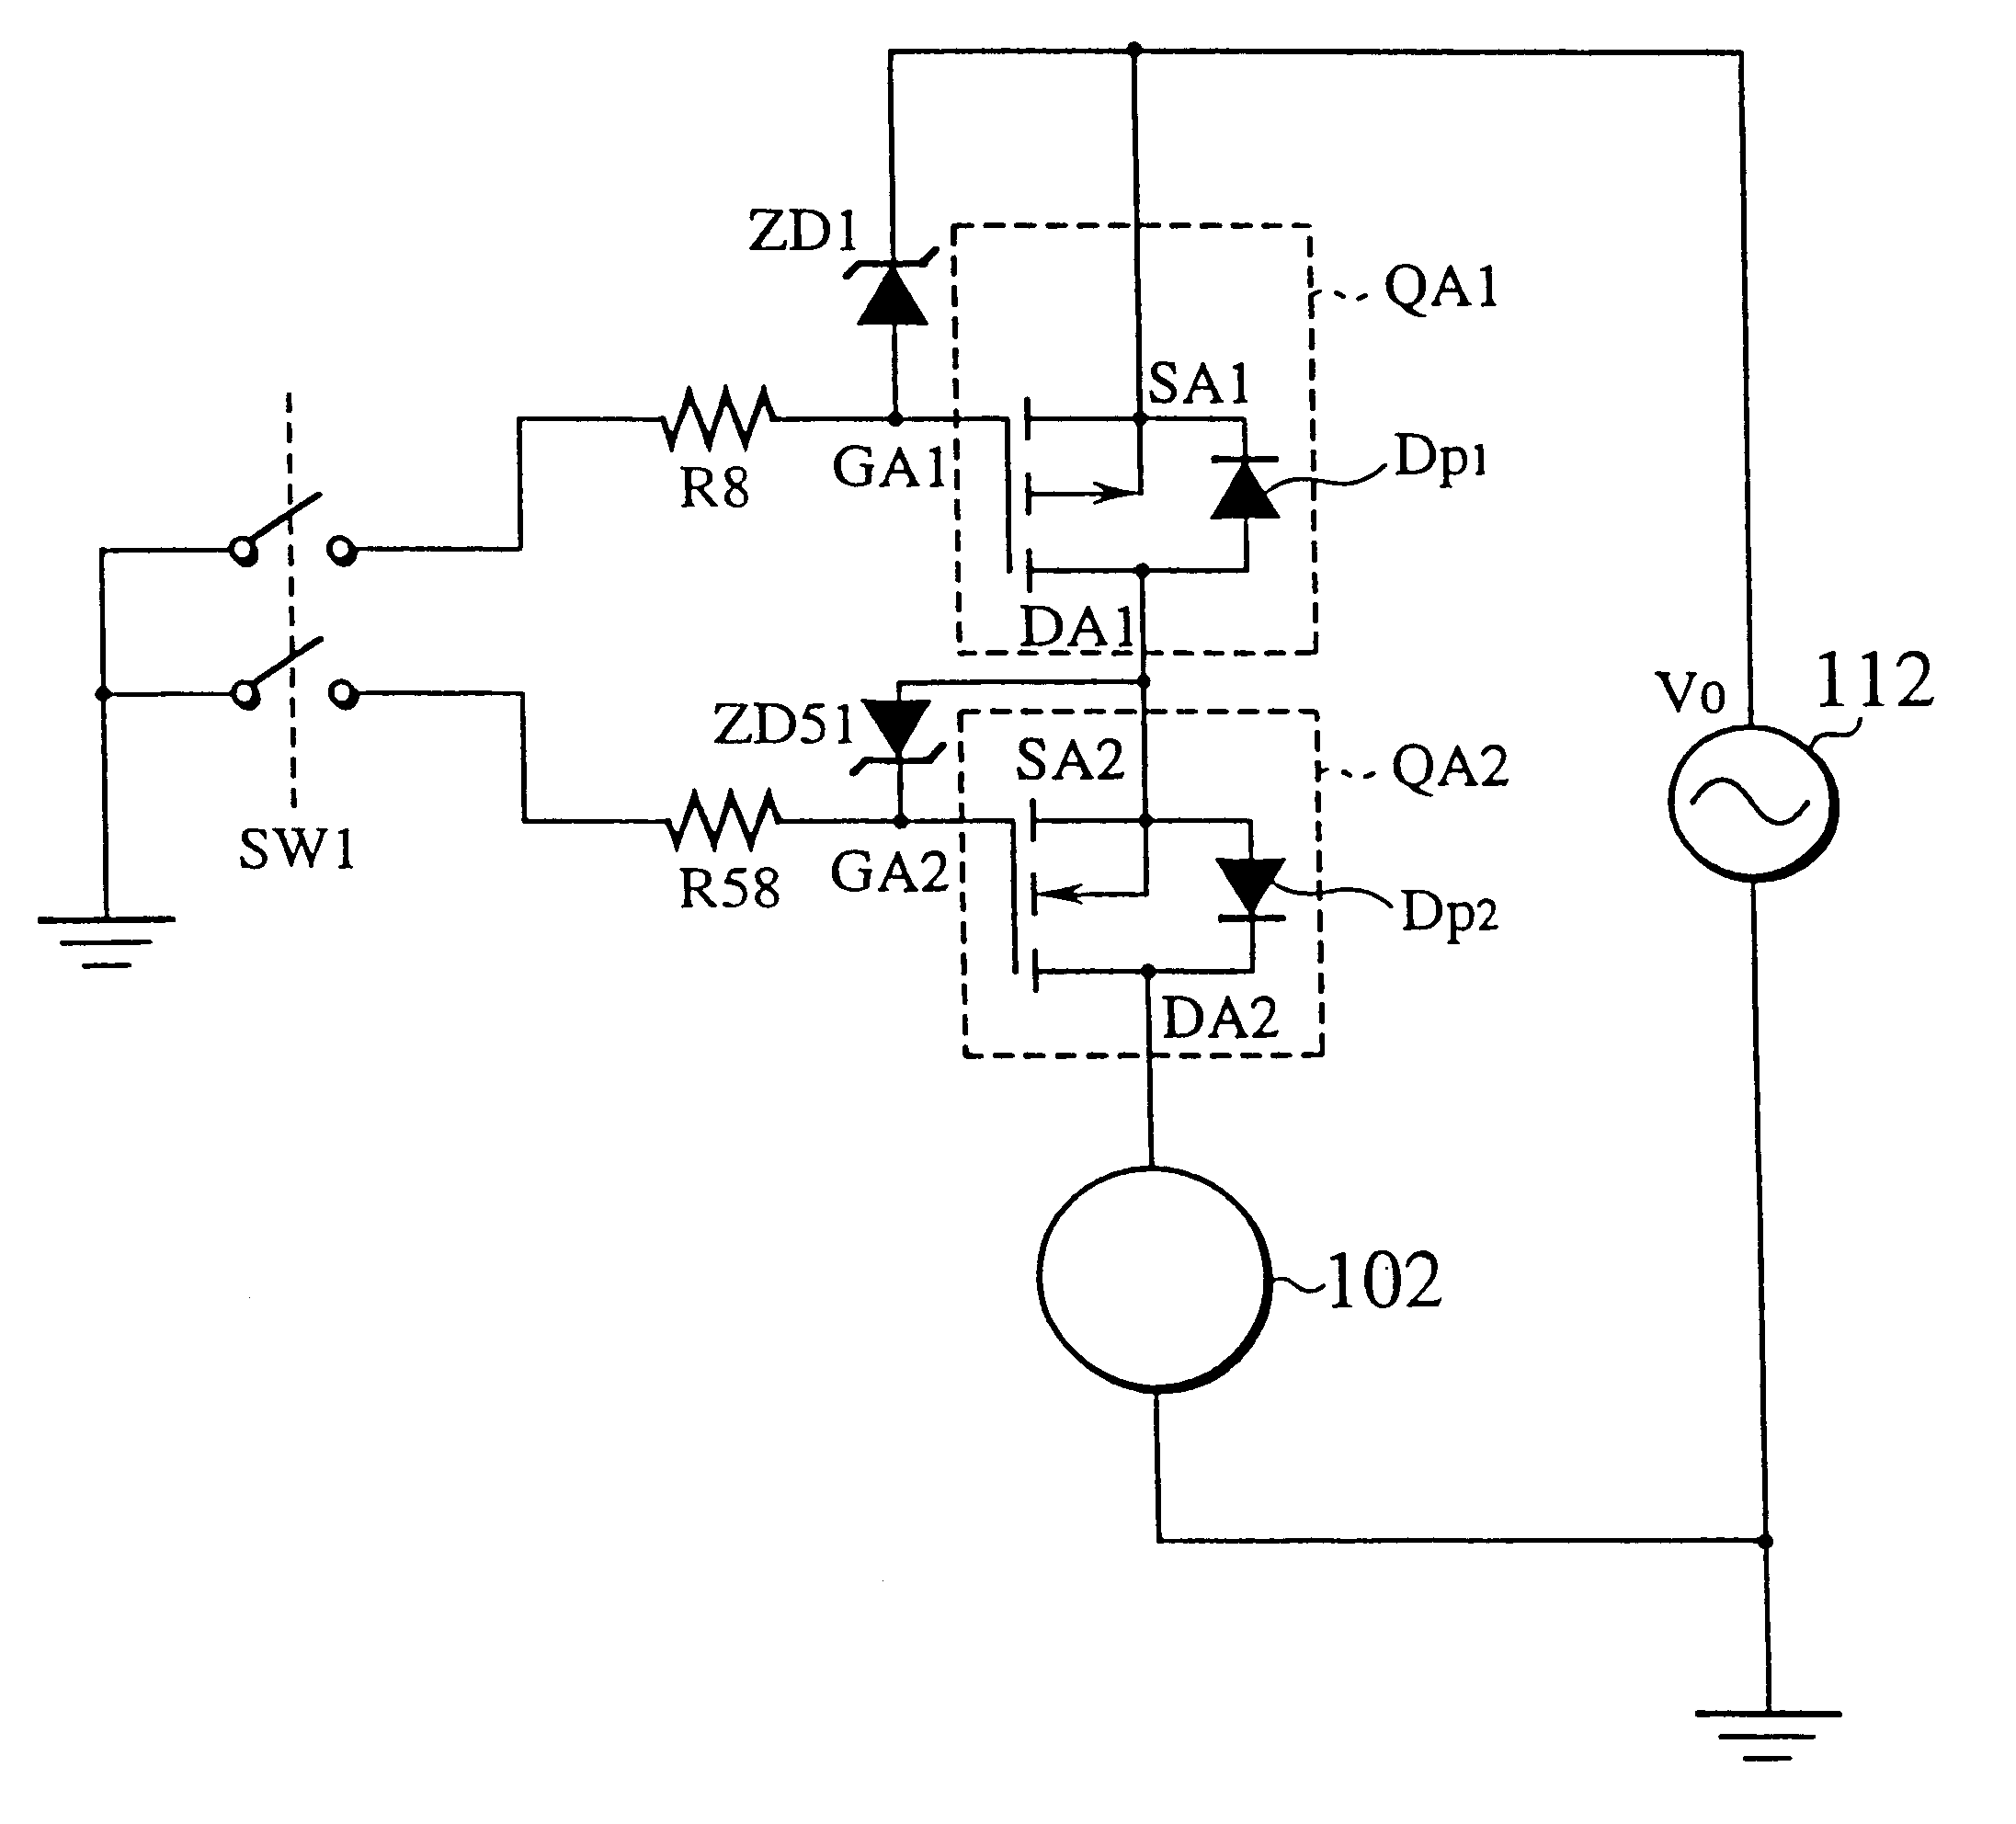 Semiconductor active fuse for AC power line and bidirectional switching device for the fuse